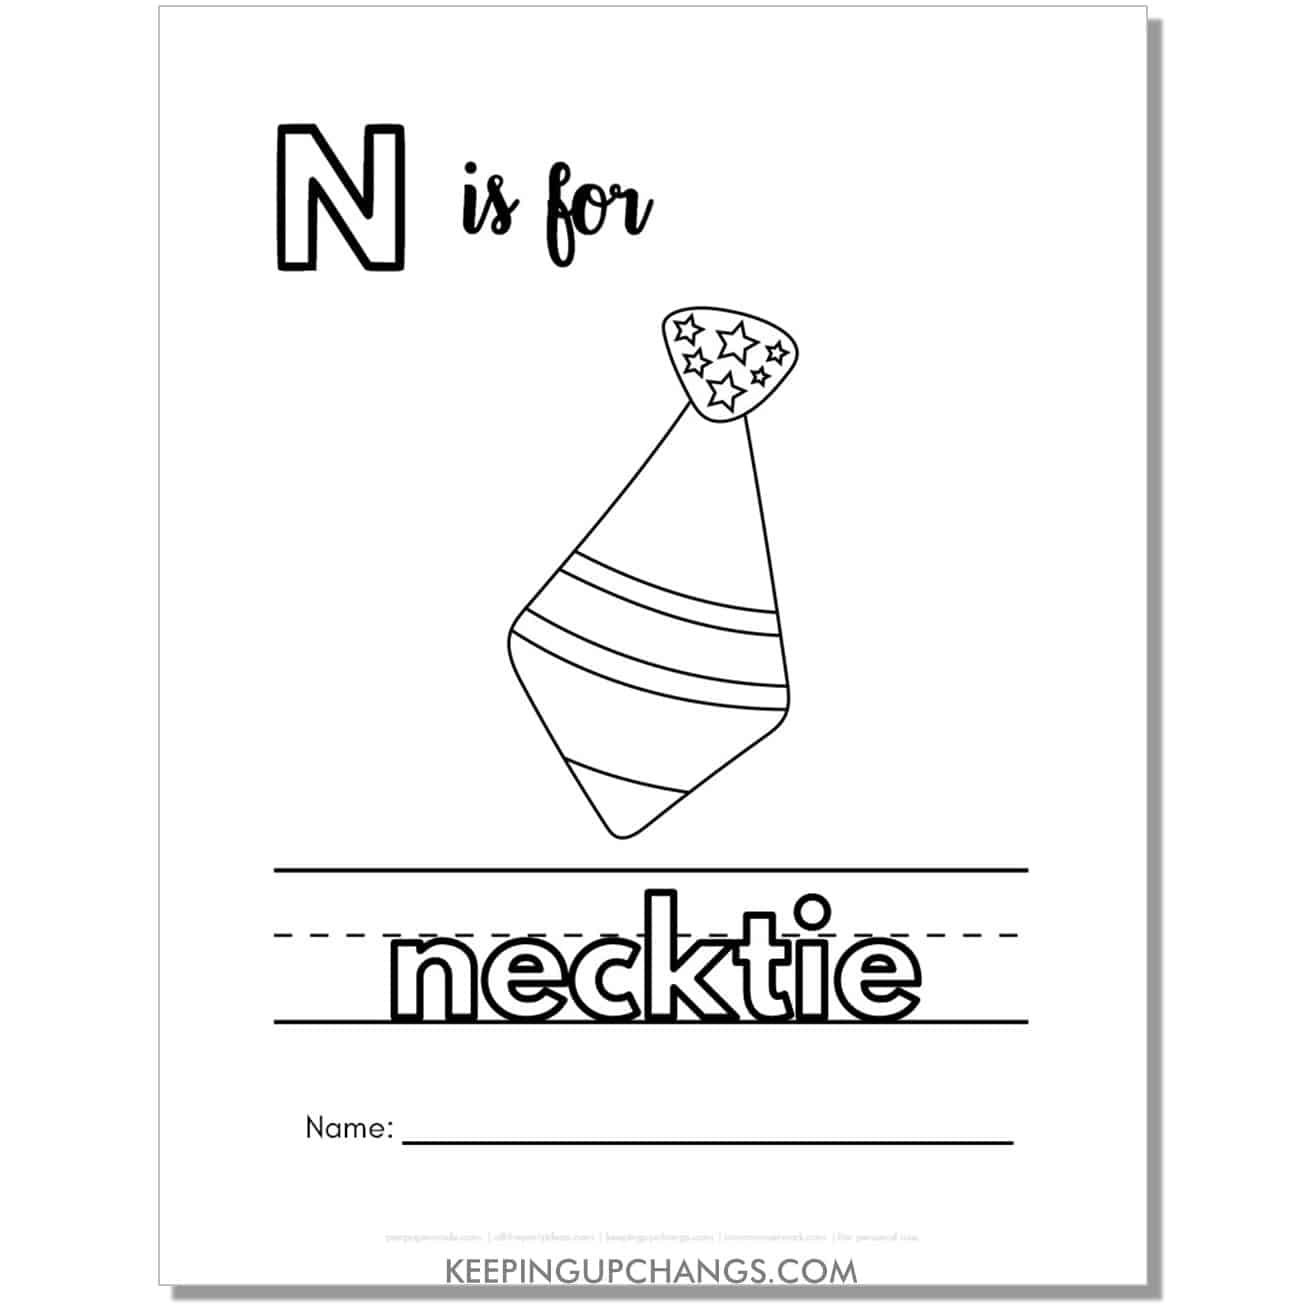 cute letter n coloring page worksheet with necktie.